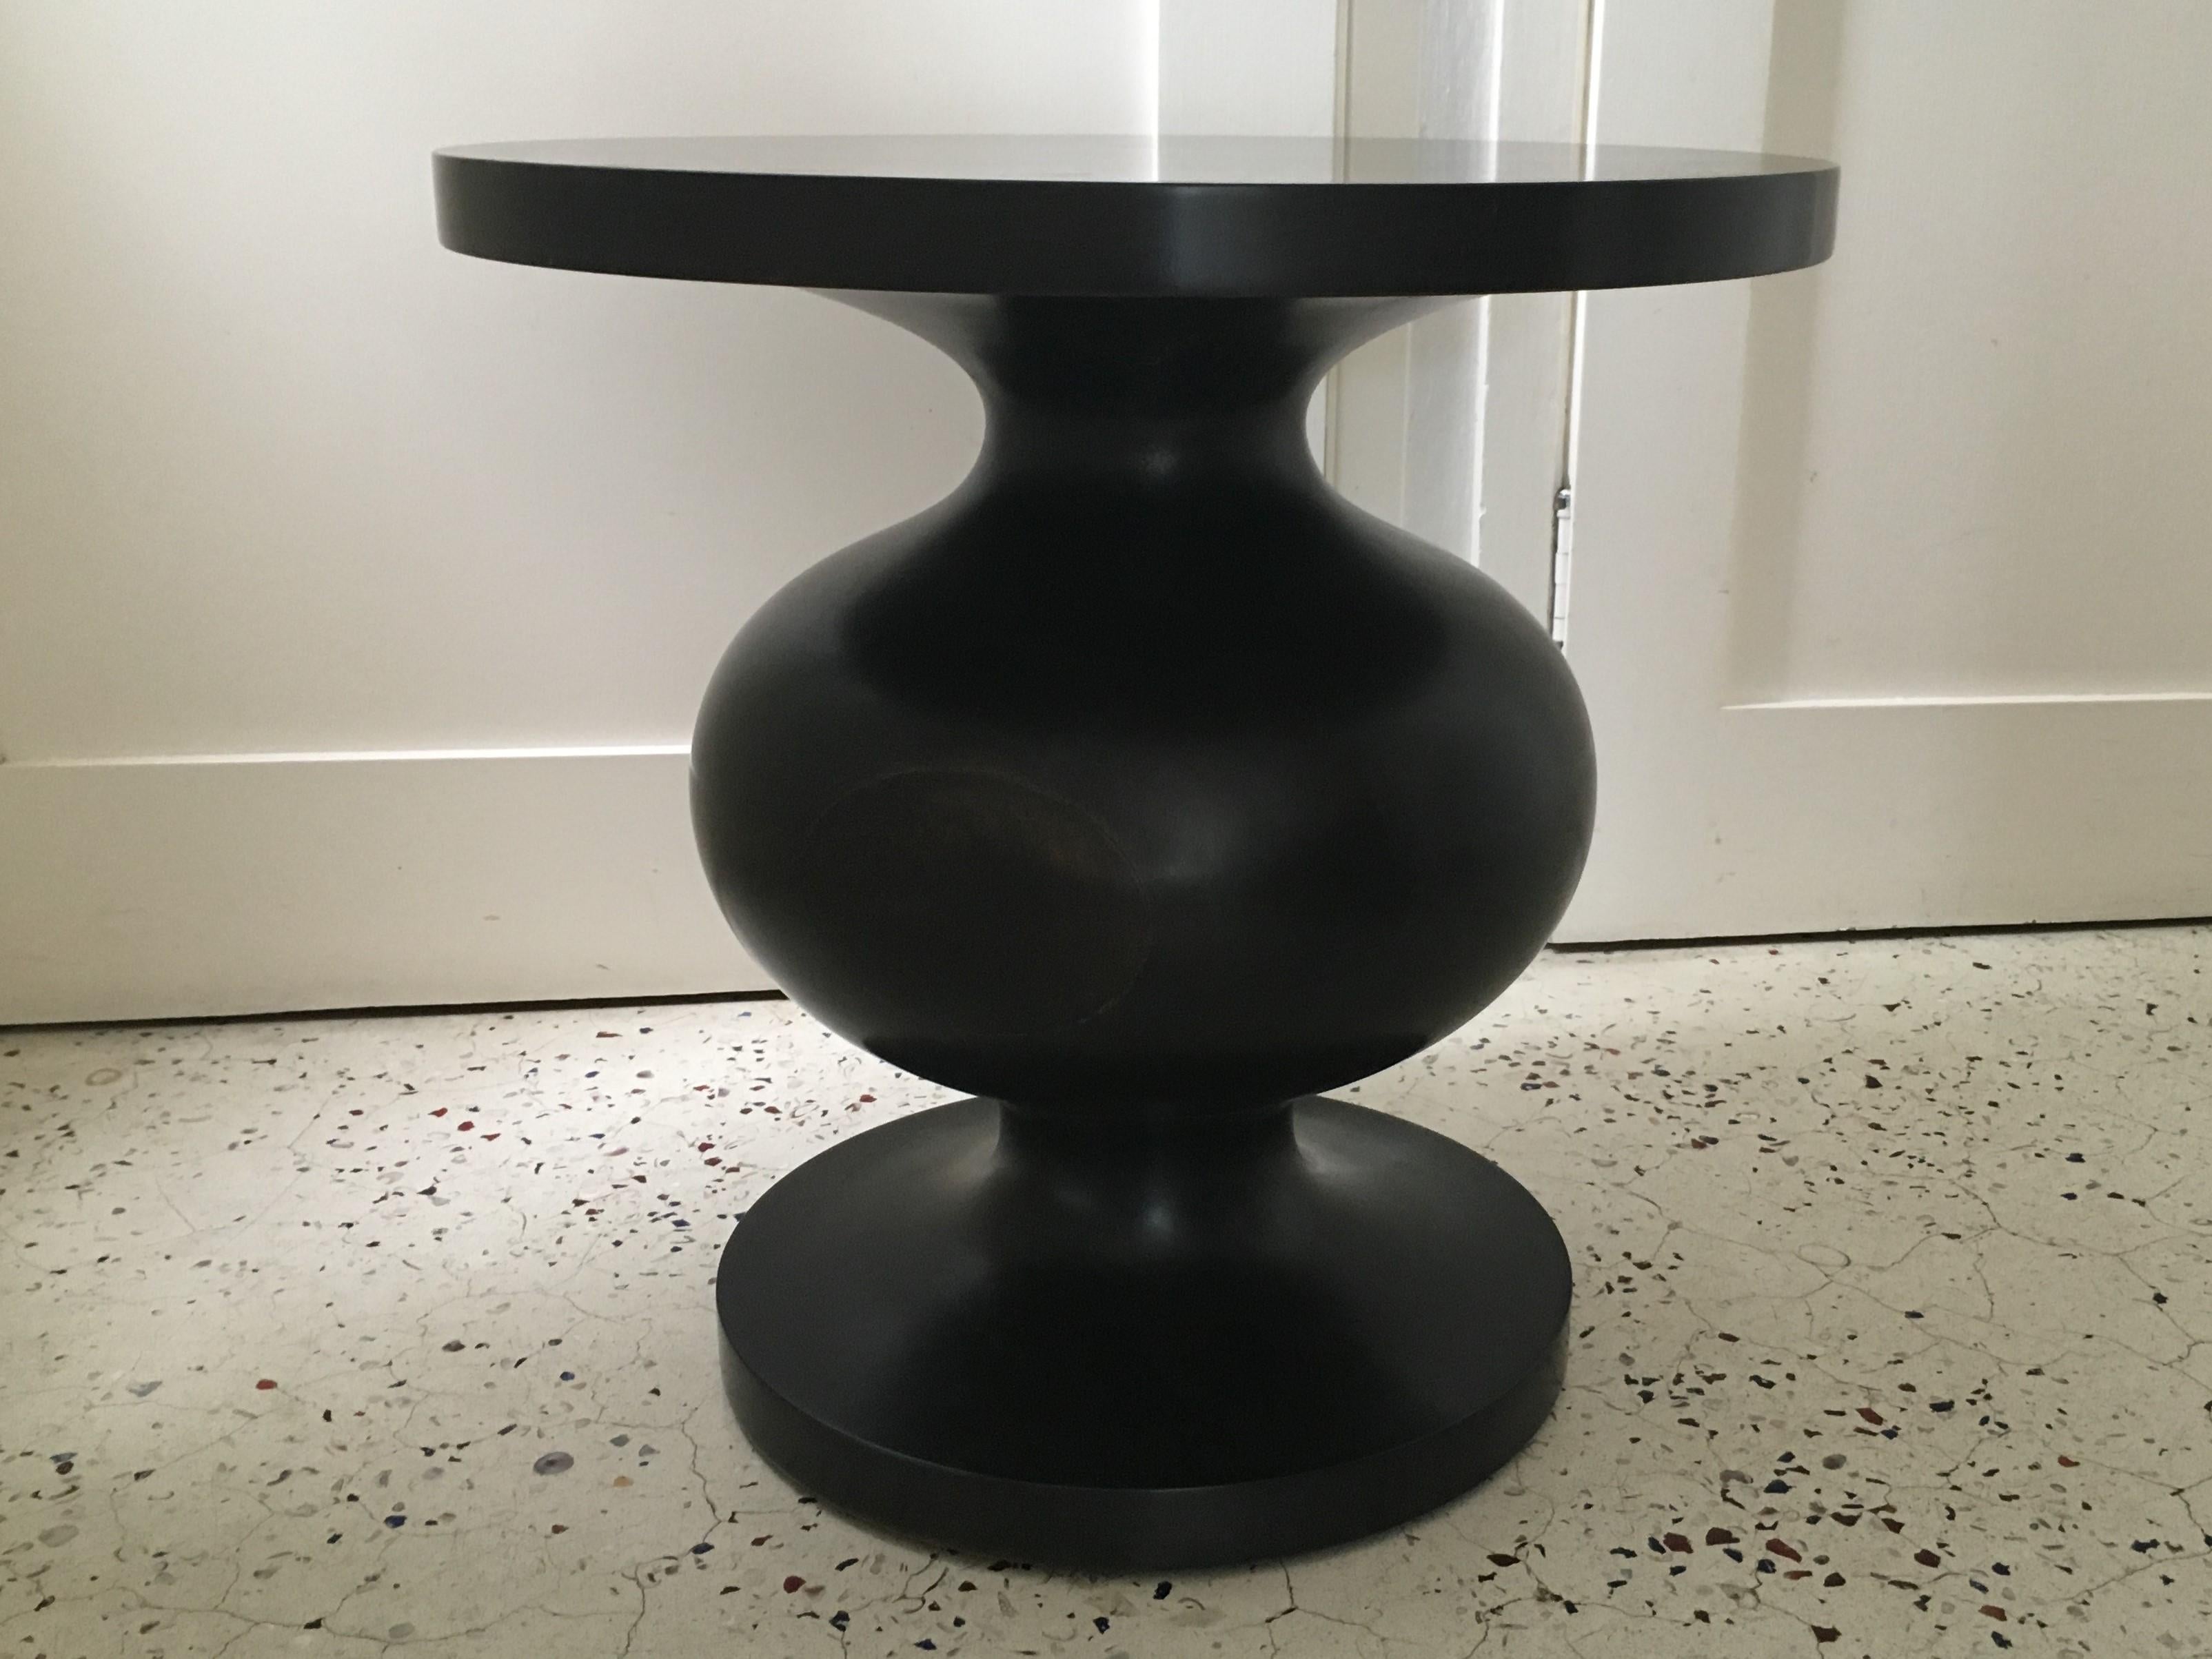 Frank Noir,  our original, ebonized, sculptural, organic modern small coffee or side table is a refined, hand finished artisanal example of early 21st century design. Its signature sensuous shape and perfect proportions are reminiscent of Jean Arp’s